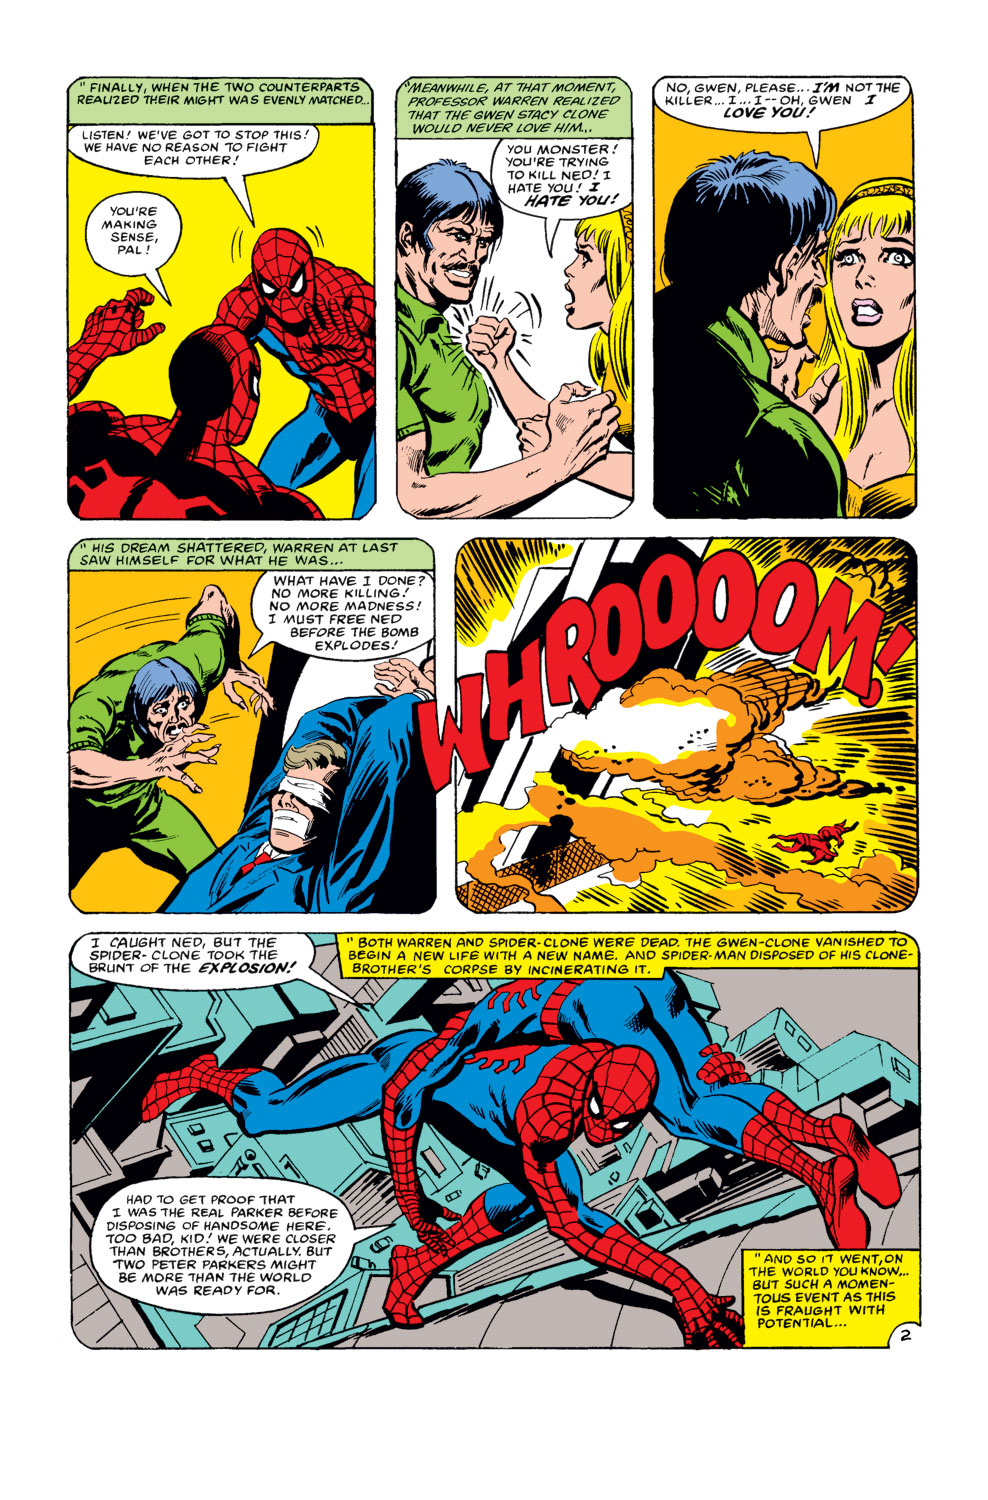 What If? (1977) issue 30 - Spider-Man's clone lived - Page 3